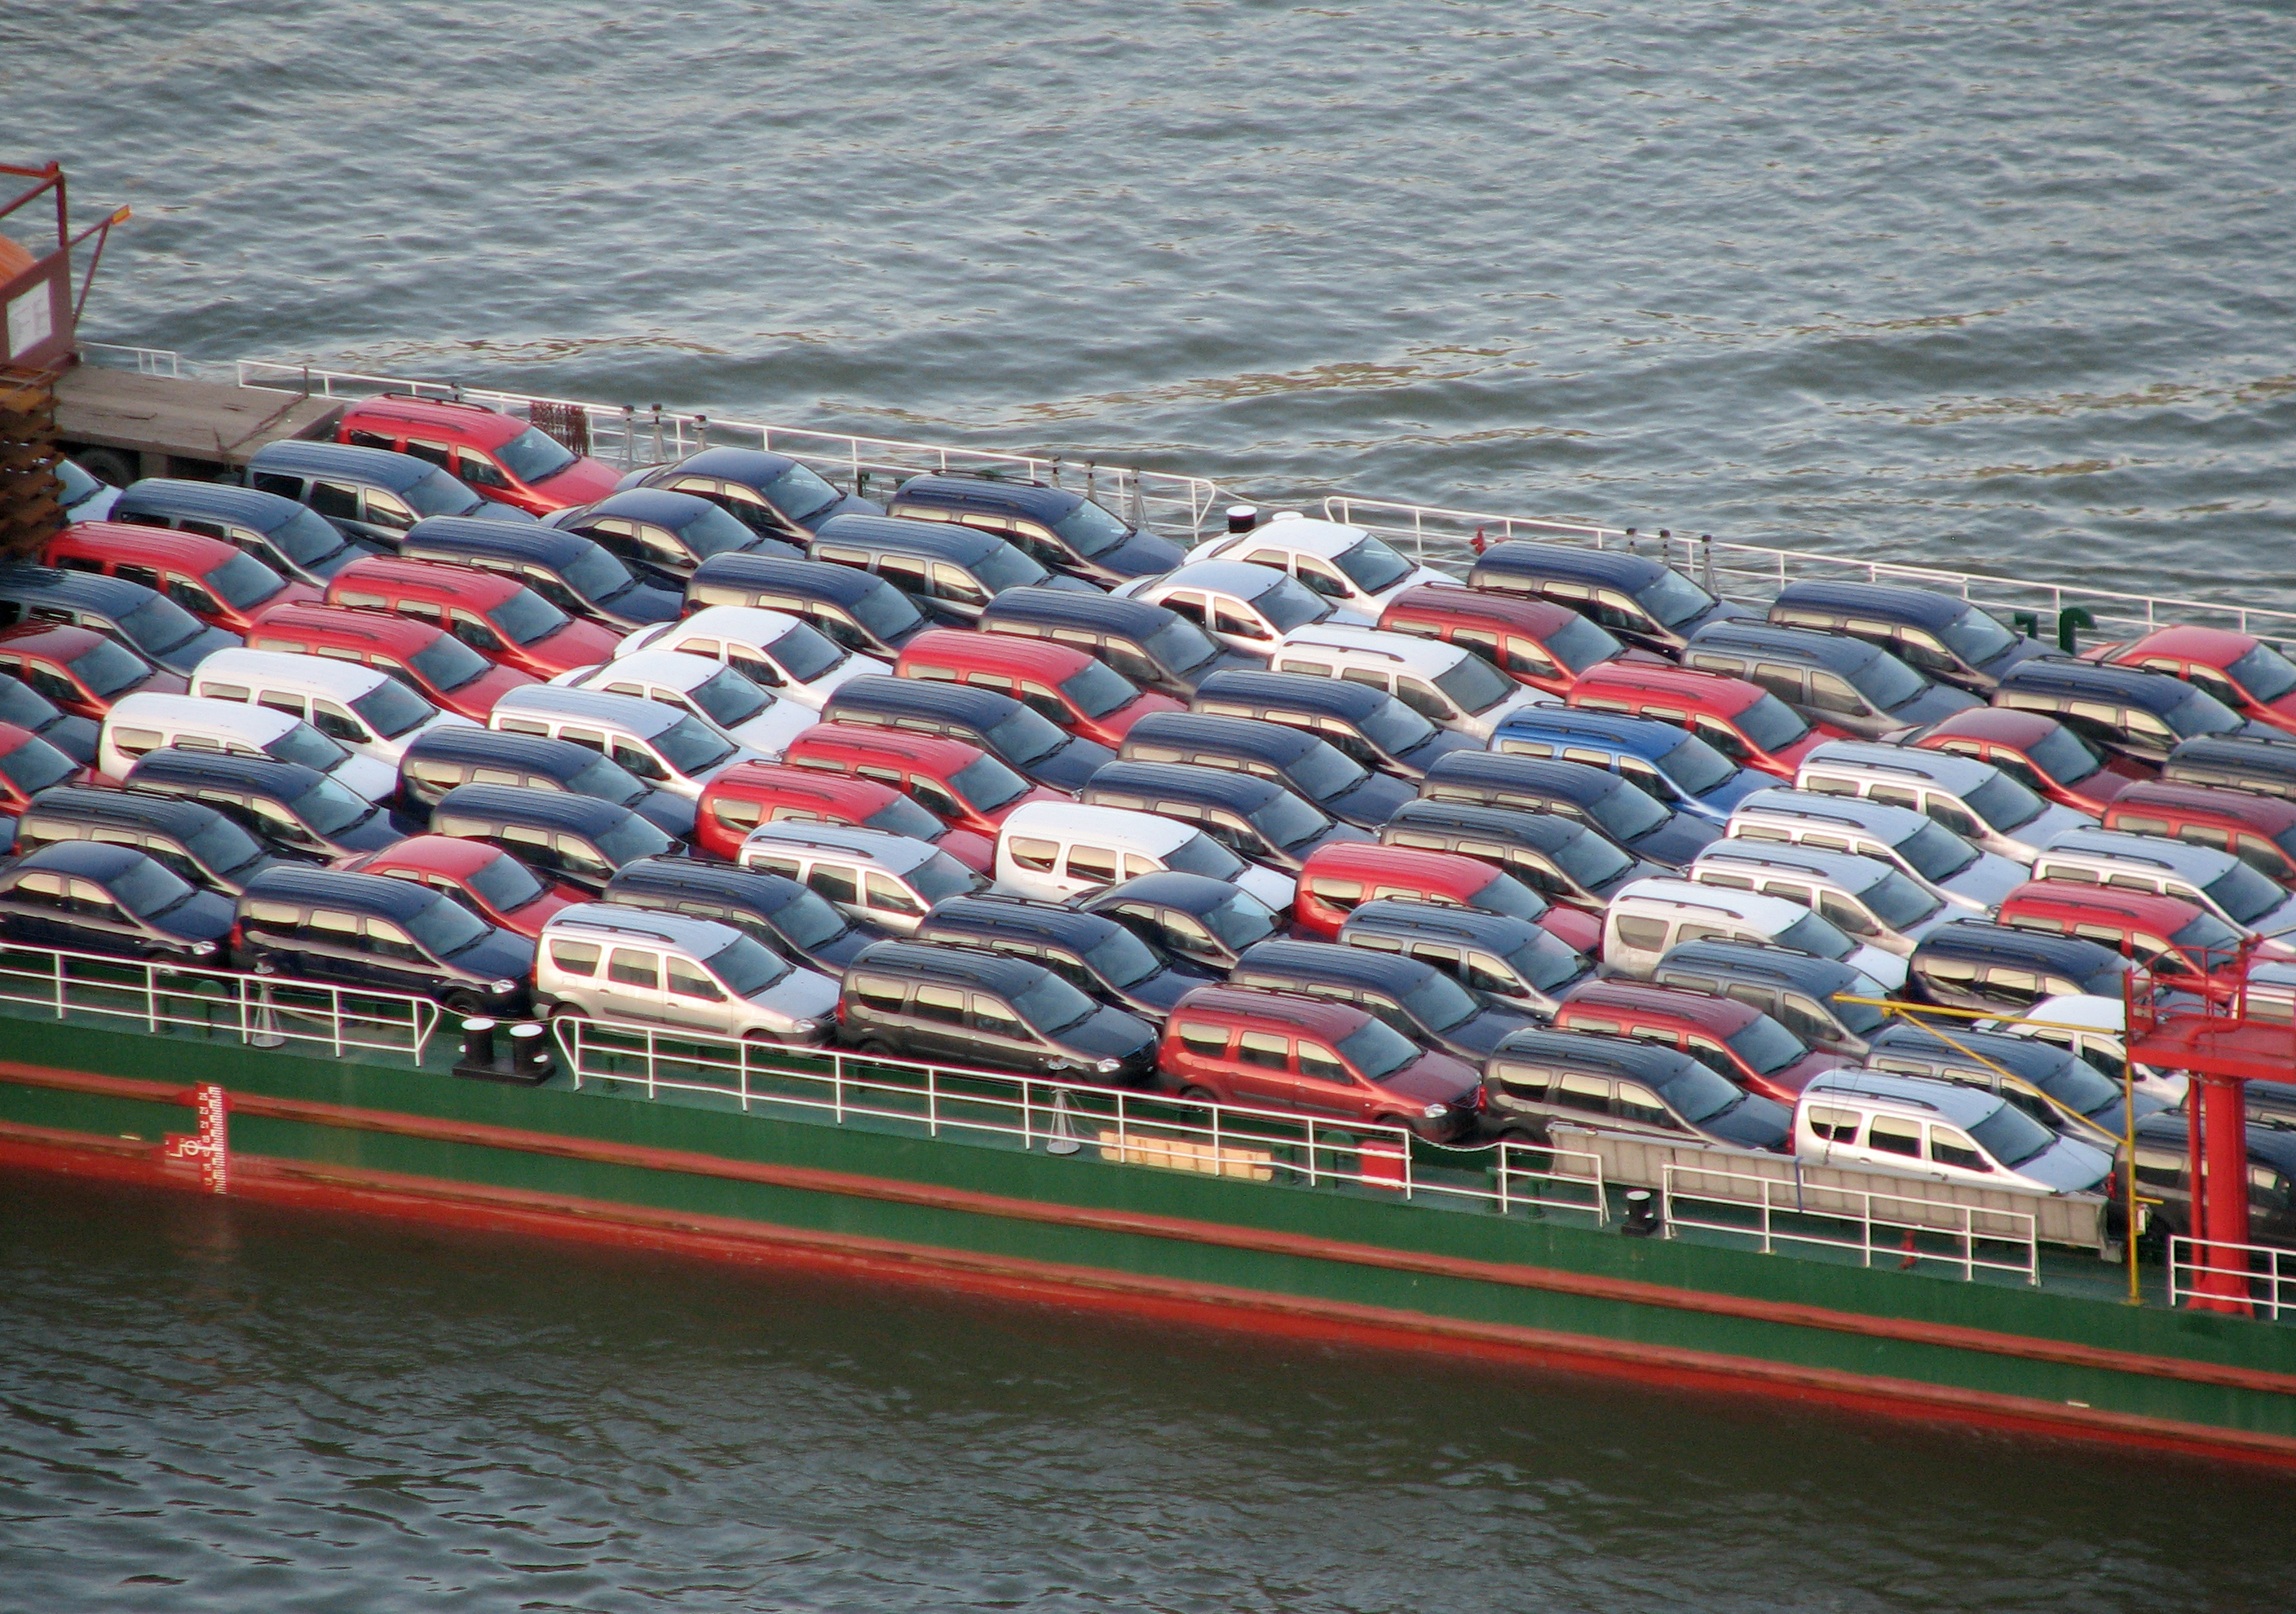 Barge with cars2